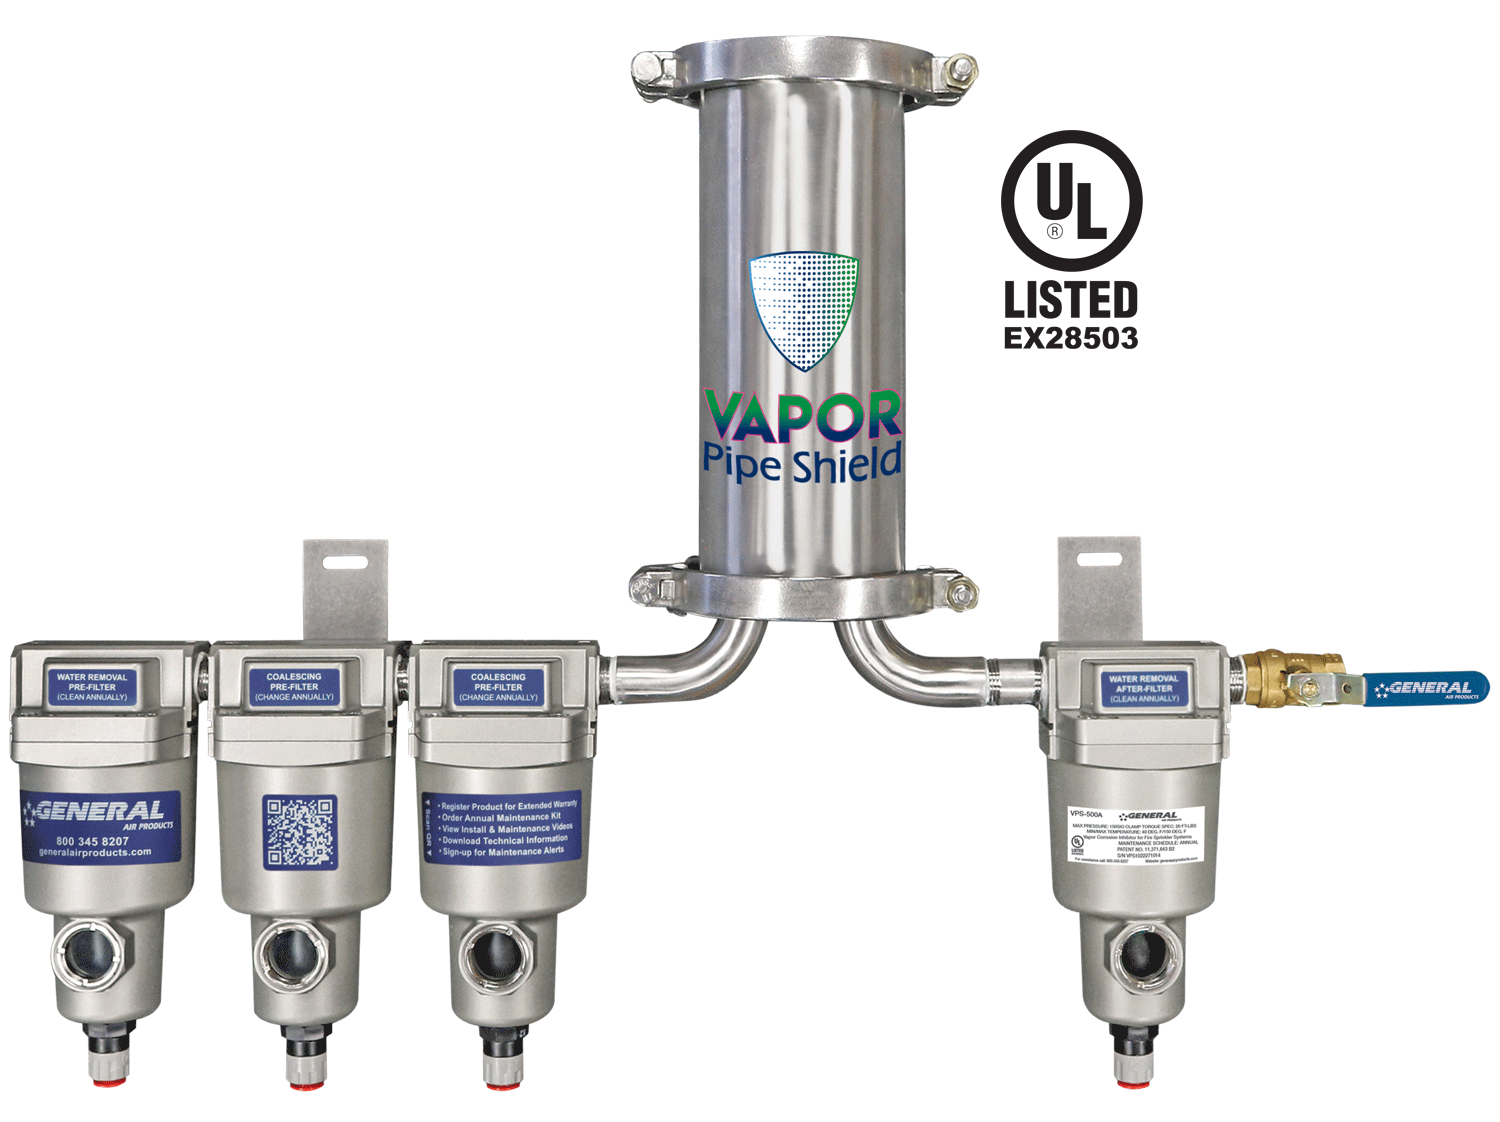 Vapor Pipe Shield Unit - VPS-500A with UL listing